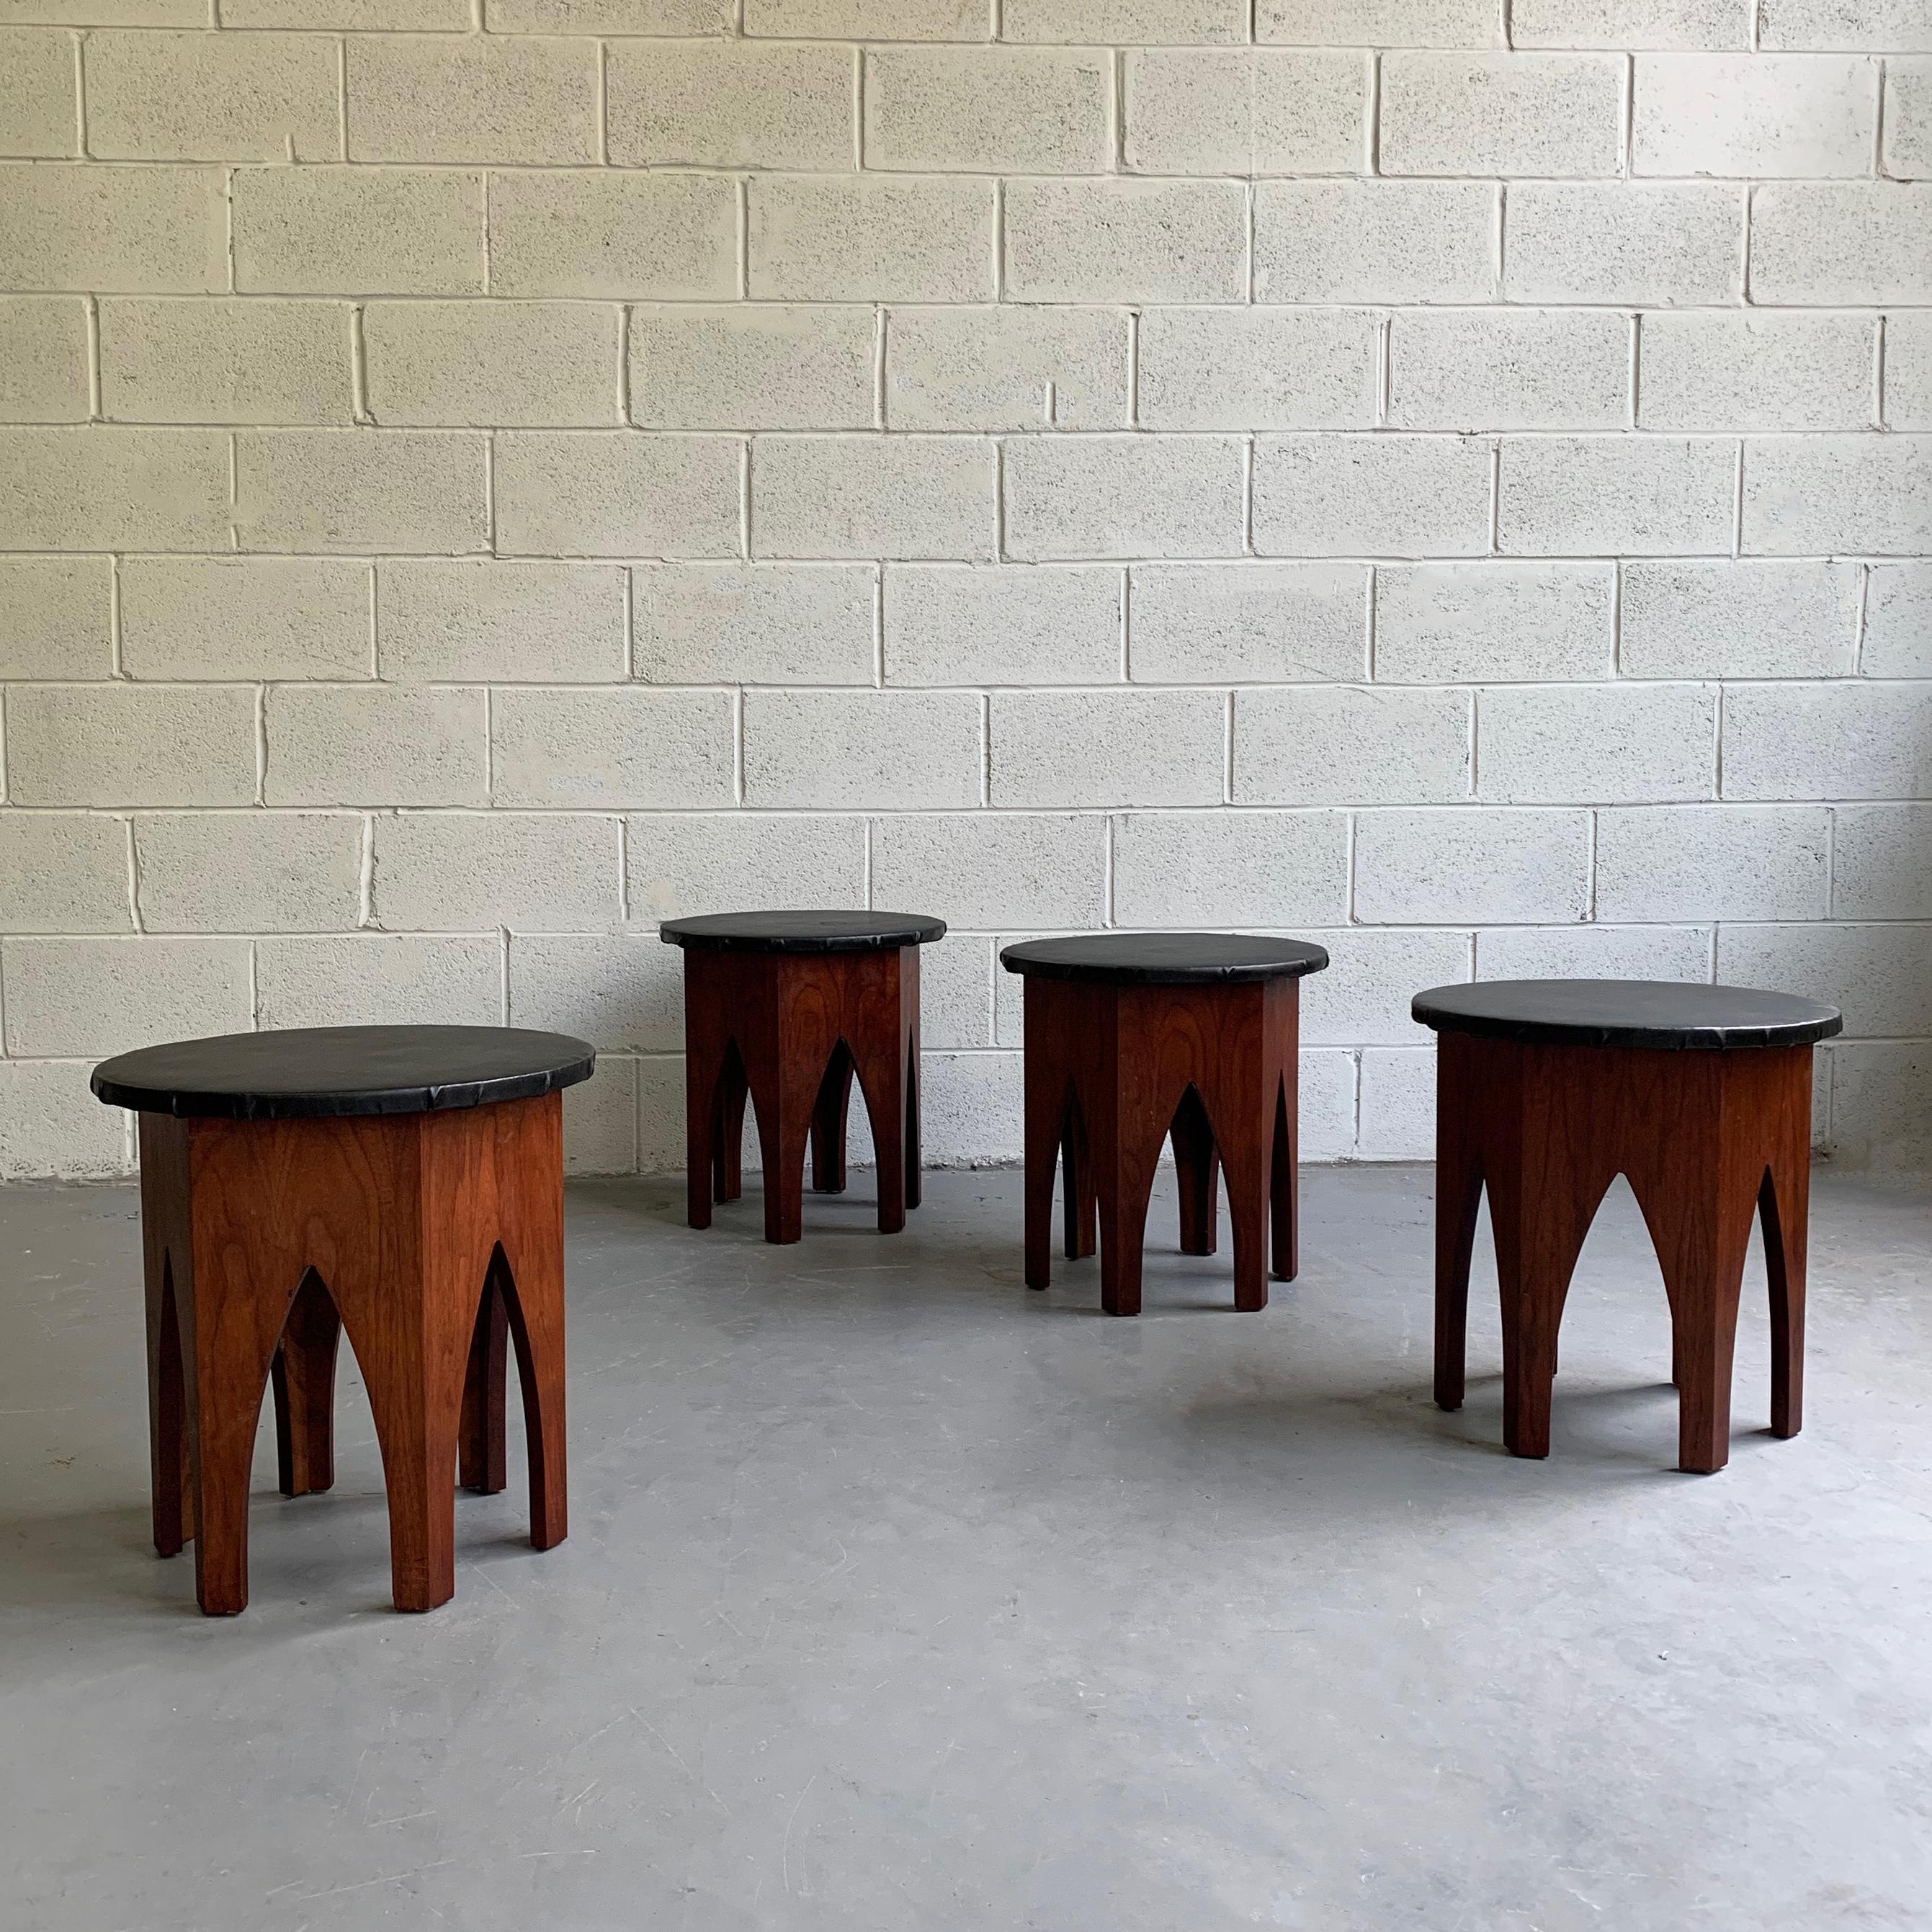 Pair of midcentury, Moroccan influenced stools or side tables in the manner of Harvey Probber feature hexagonal, walnut bases and black vinyl tops. The tops can be replaced with a flat surface to use as side tables. One pair is available.